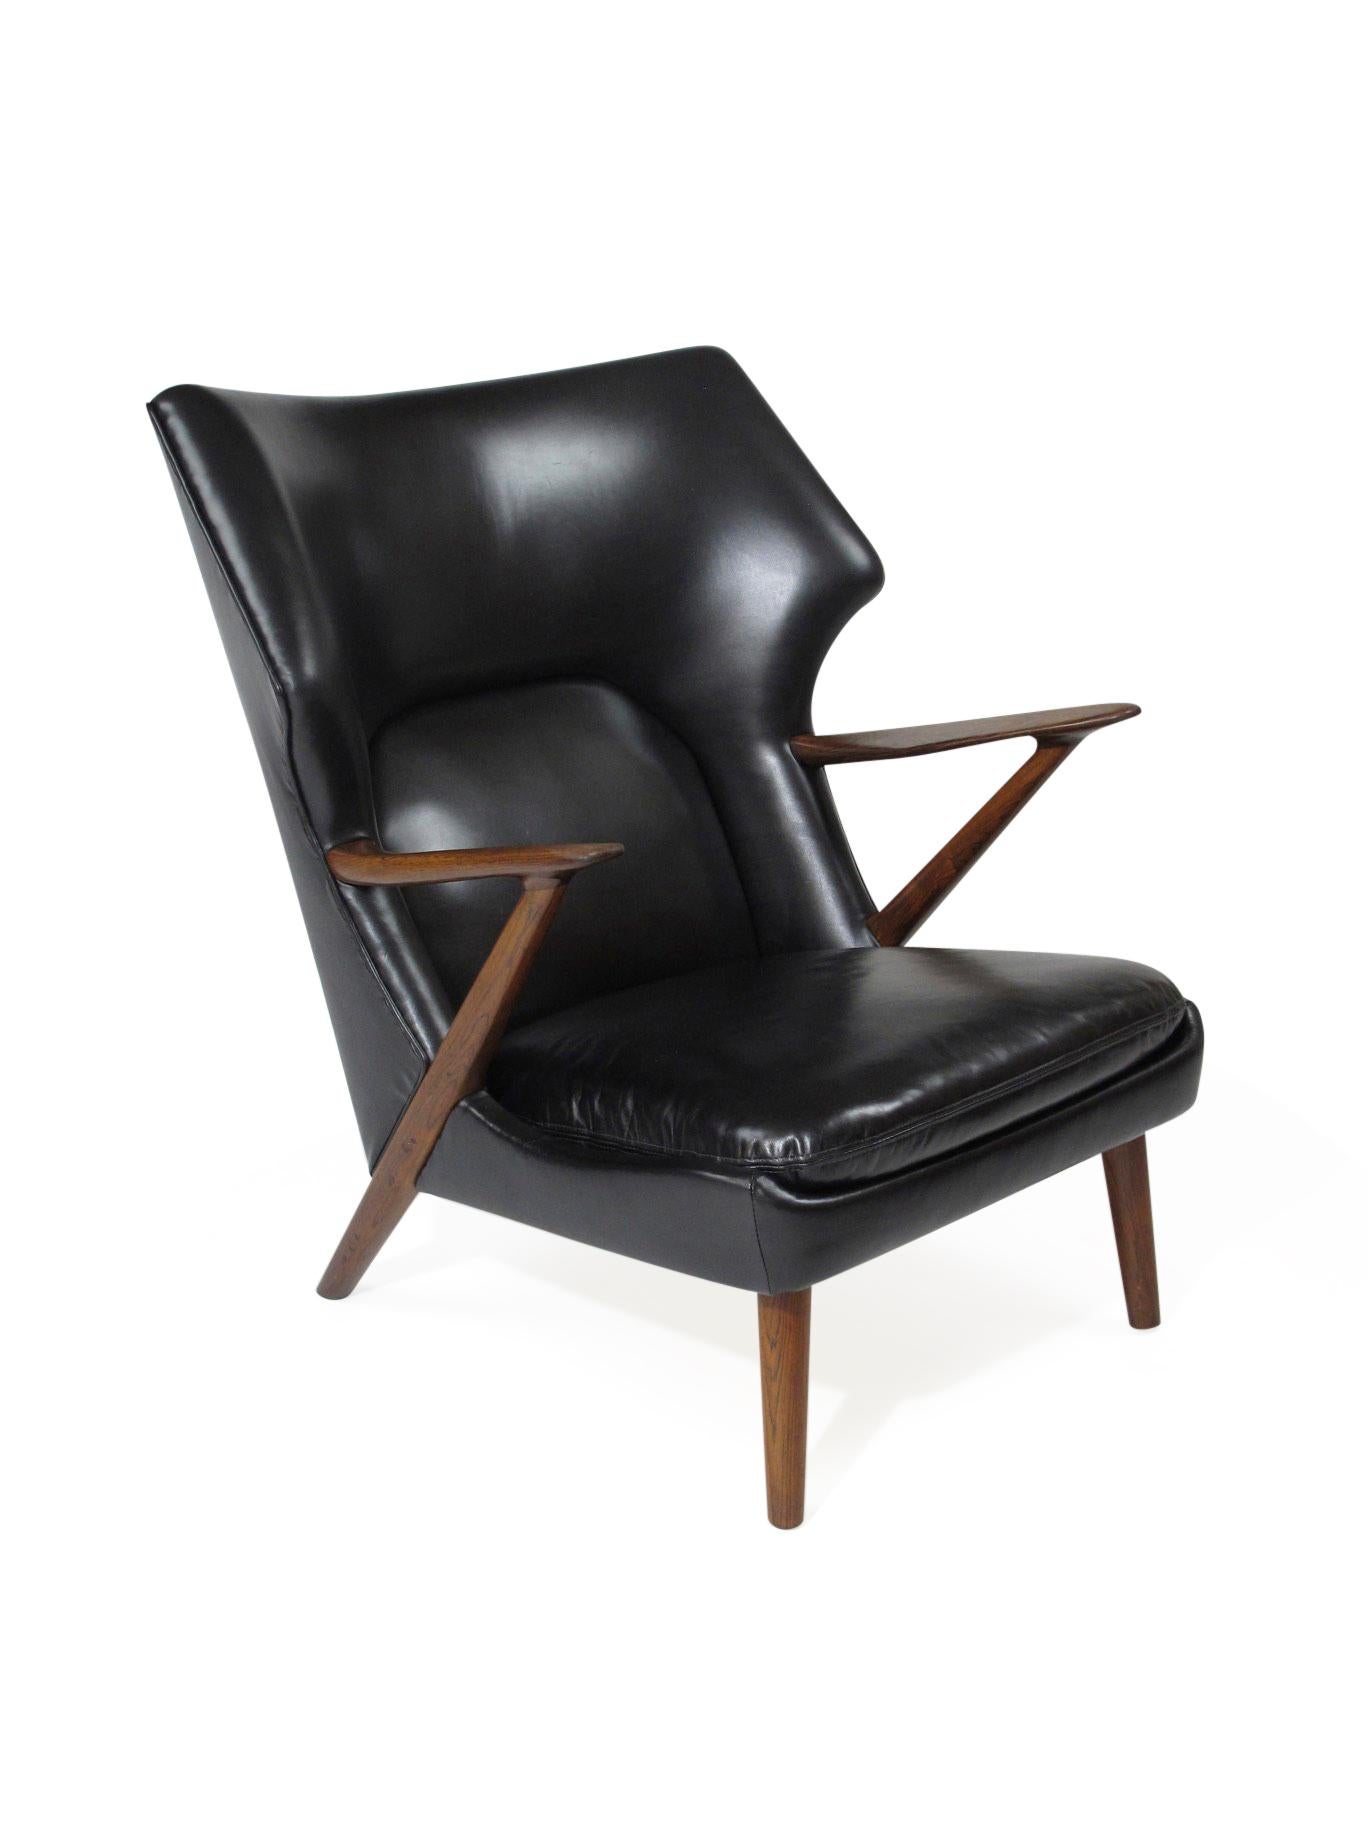 Kurt Olsen Danish Rosewood Black Leather Bear Chair In Excellent Condition For Sale In Oakland, CA